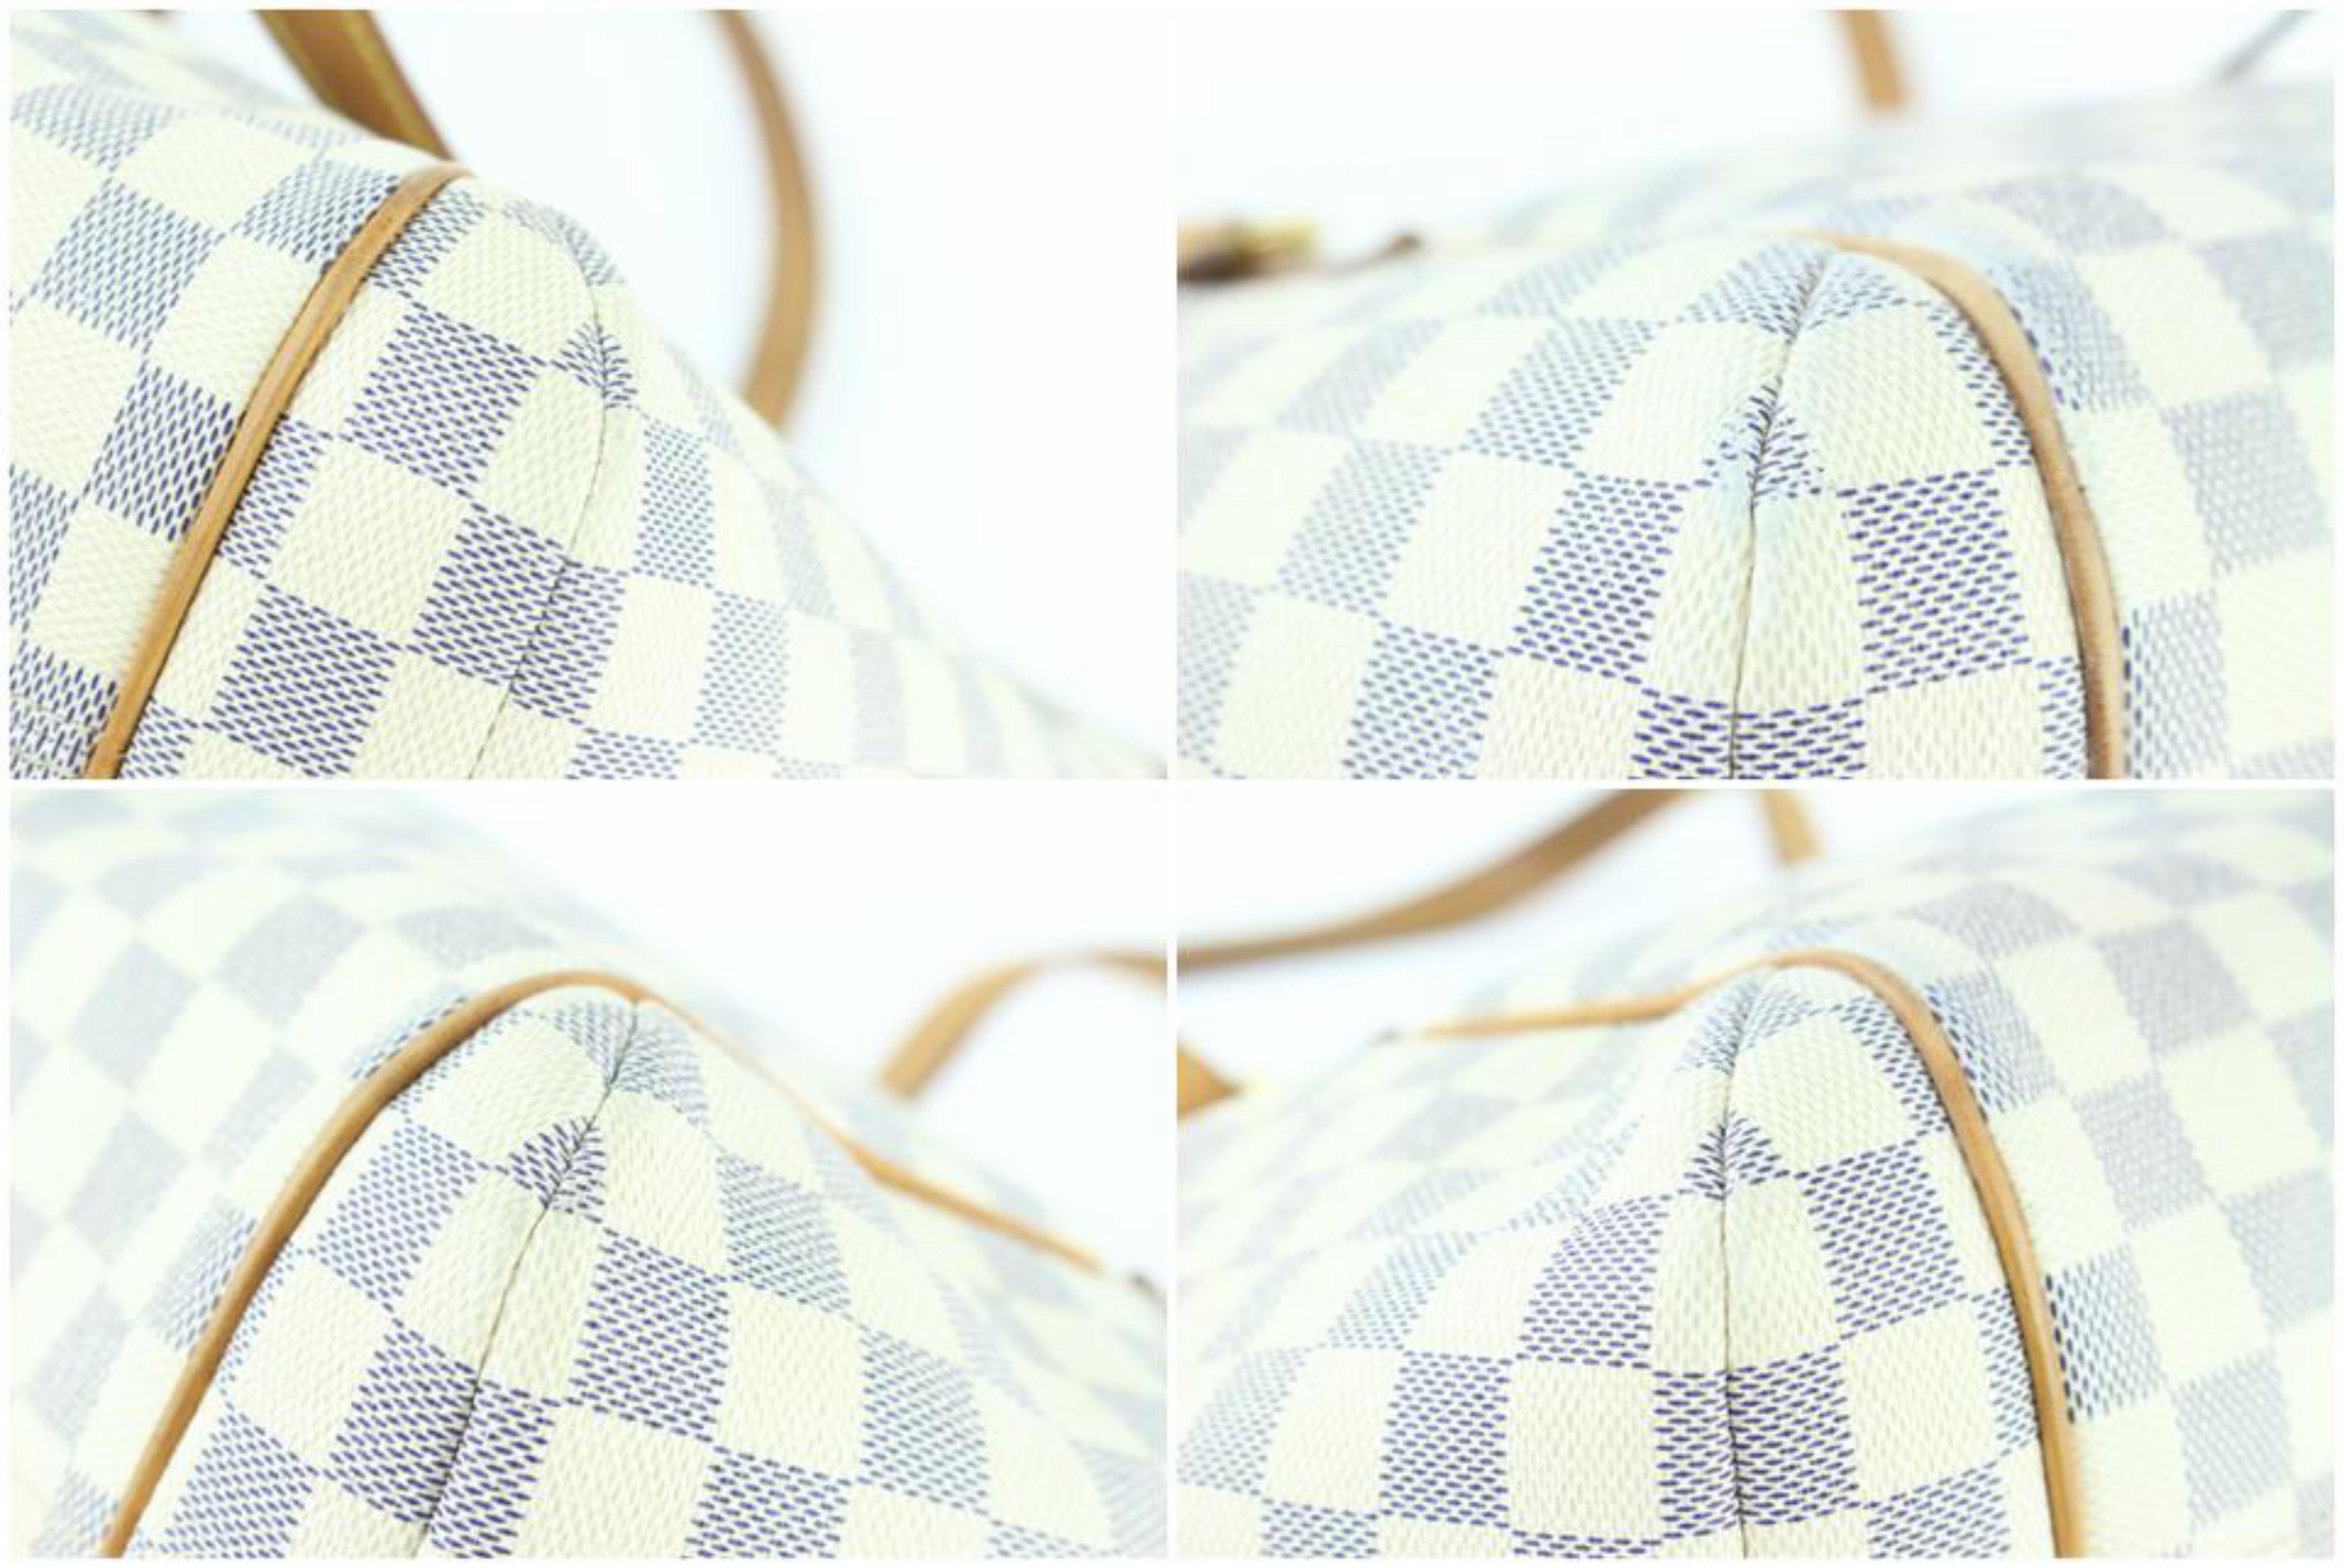 Louis Vuitton Totally Damier Azur Pm Zip 16lz1211 White Coated Canvas Tote For Sale 8